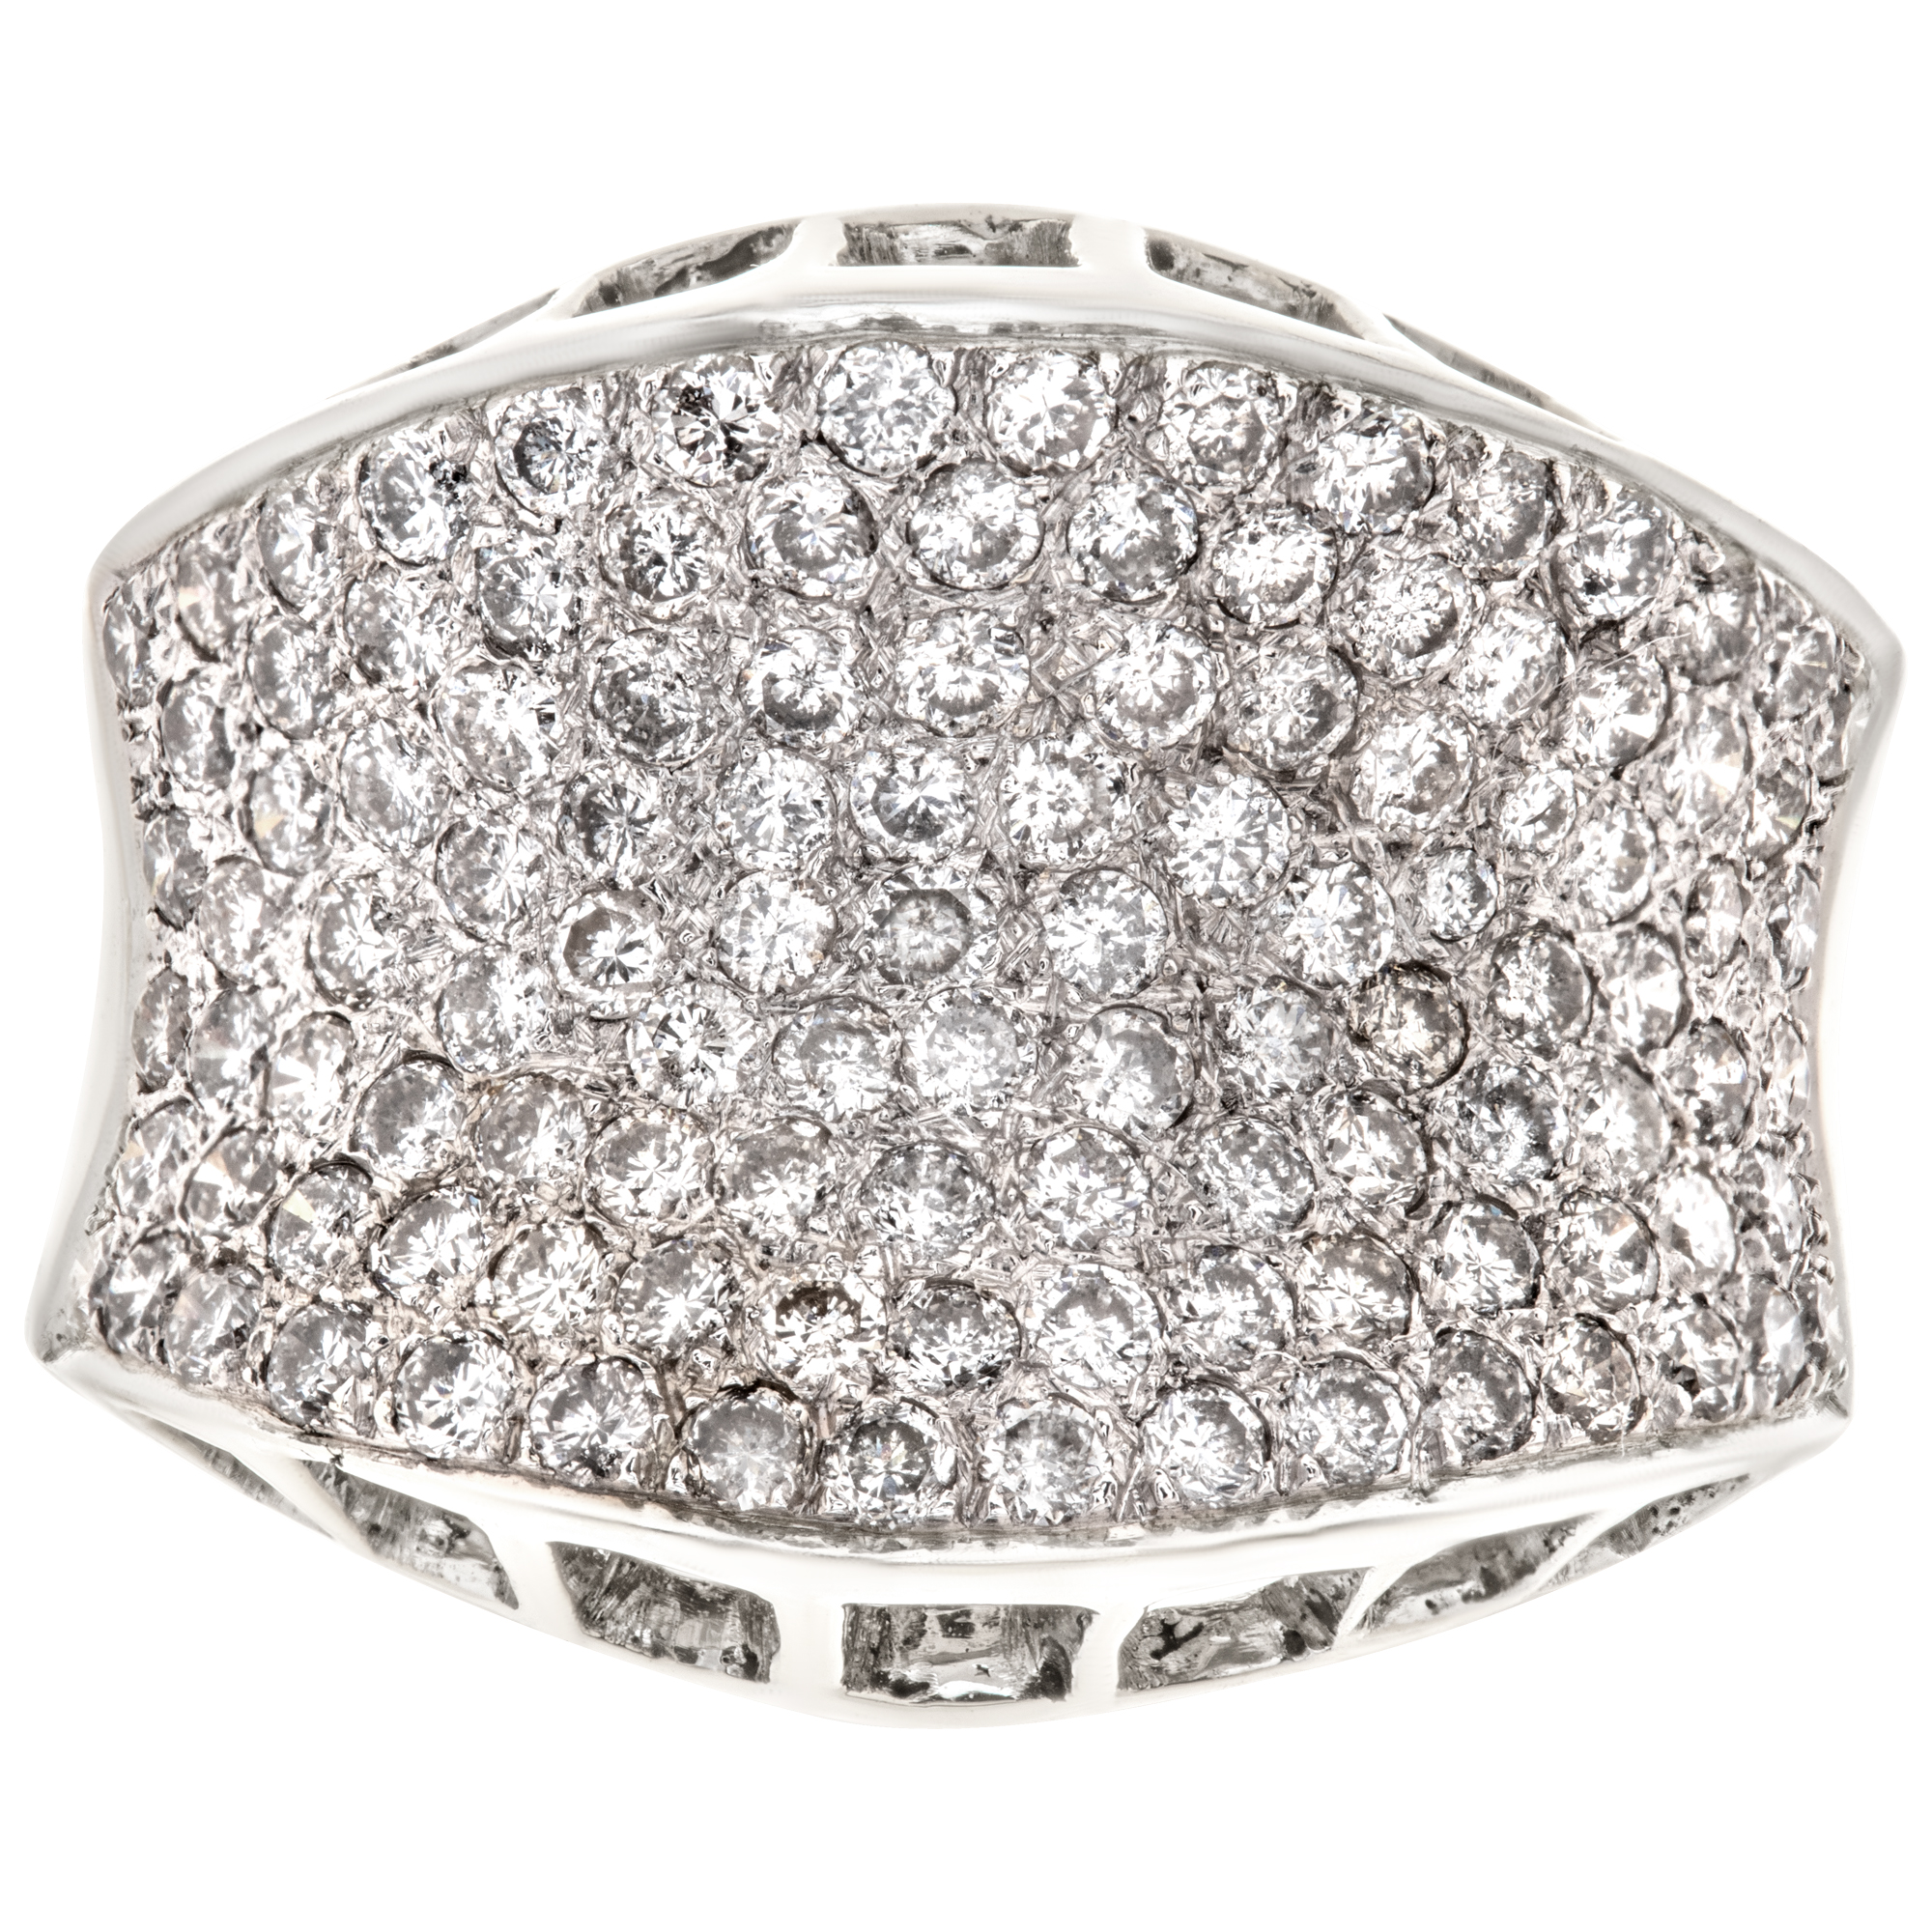 Exquisite pave diamond ring in white gold. 1.25 carats in pave diamonds. Size 6 image 2